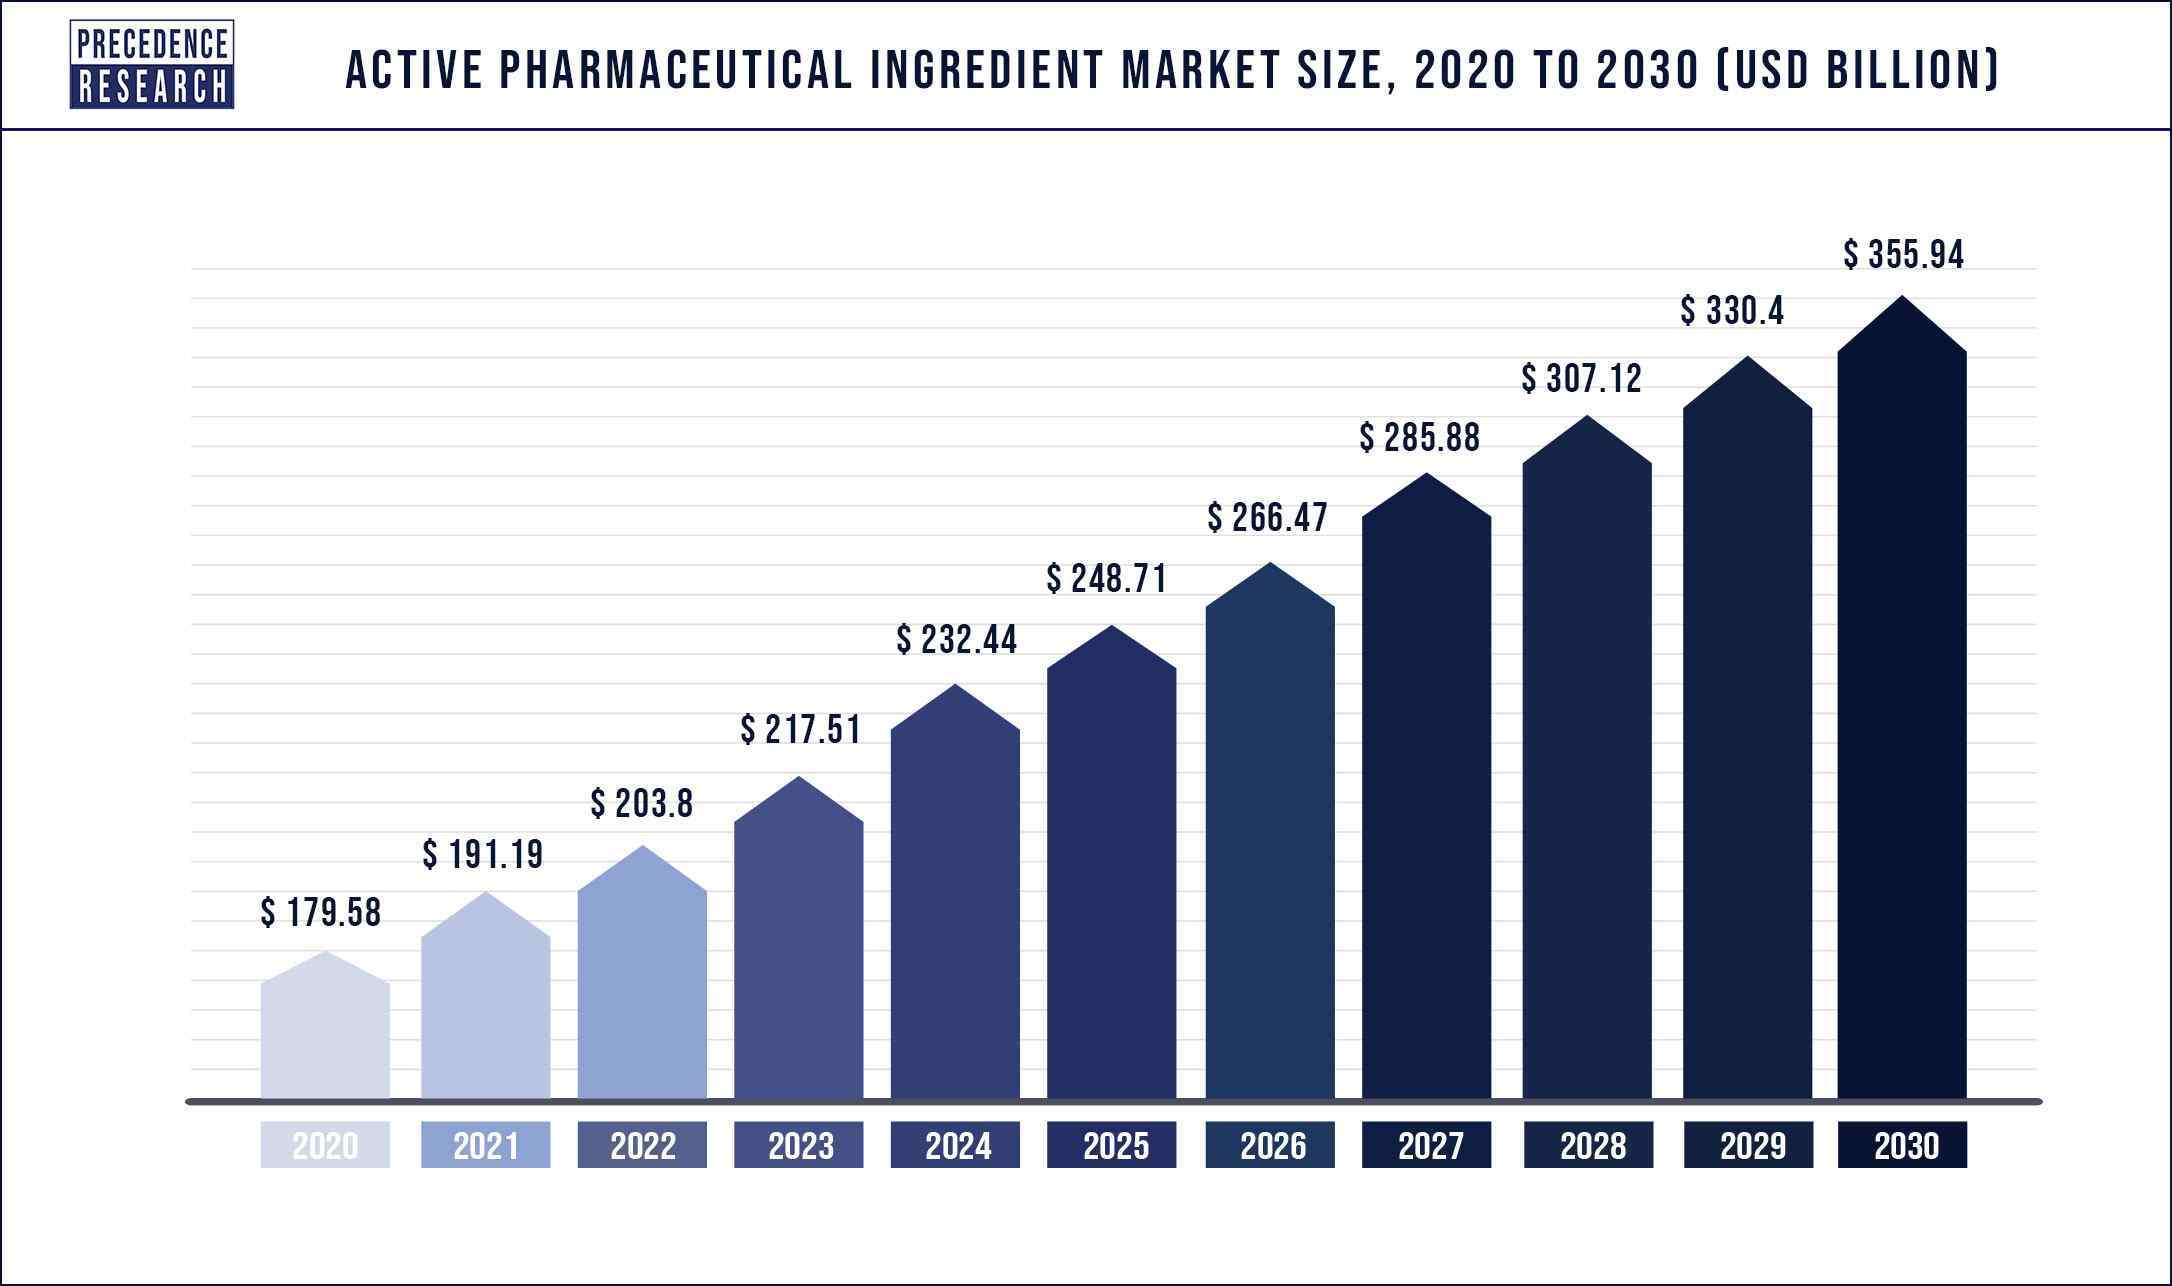 Active Pharmaceutical Ingredient Market Size 2020 to 2030